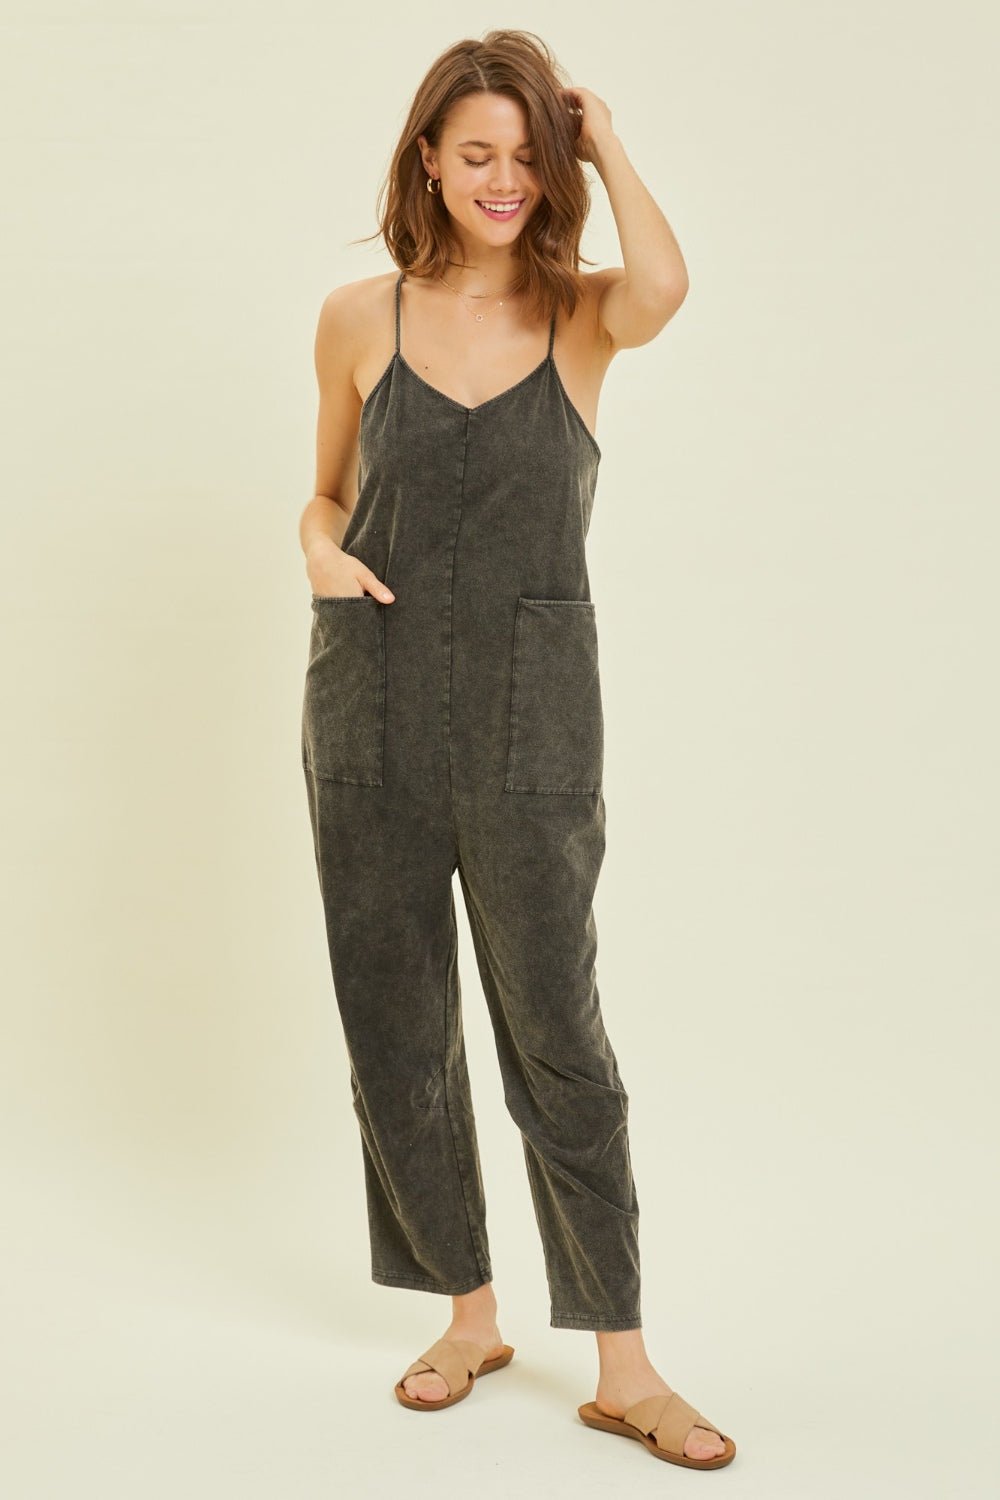 HEYSON Full Size Mineral-Washed Oversized Jumpsuit with Pockets - Bitsy Gypsy Boutique